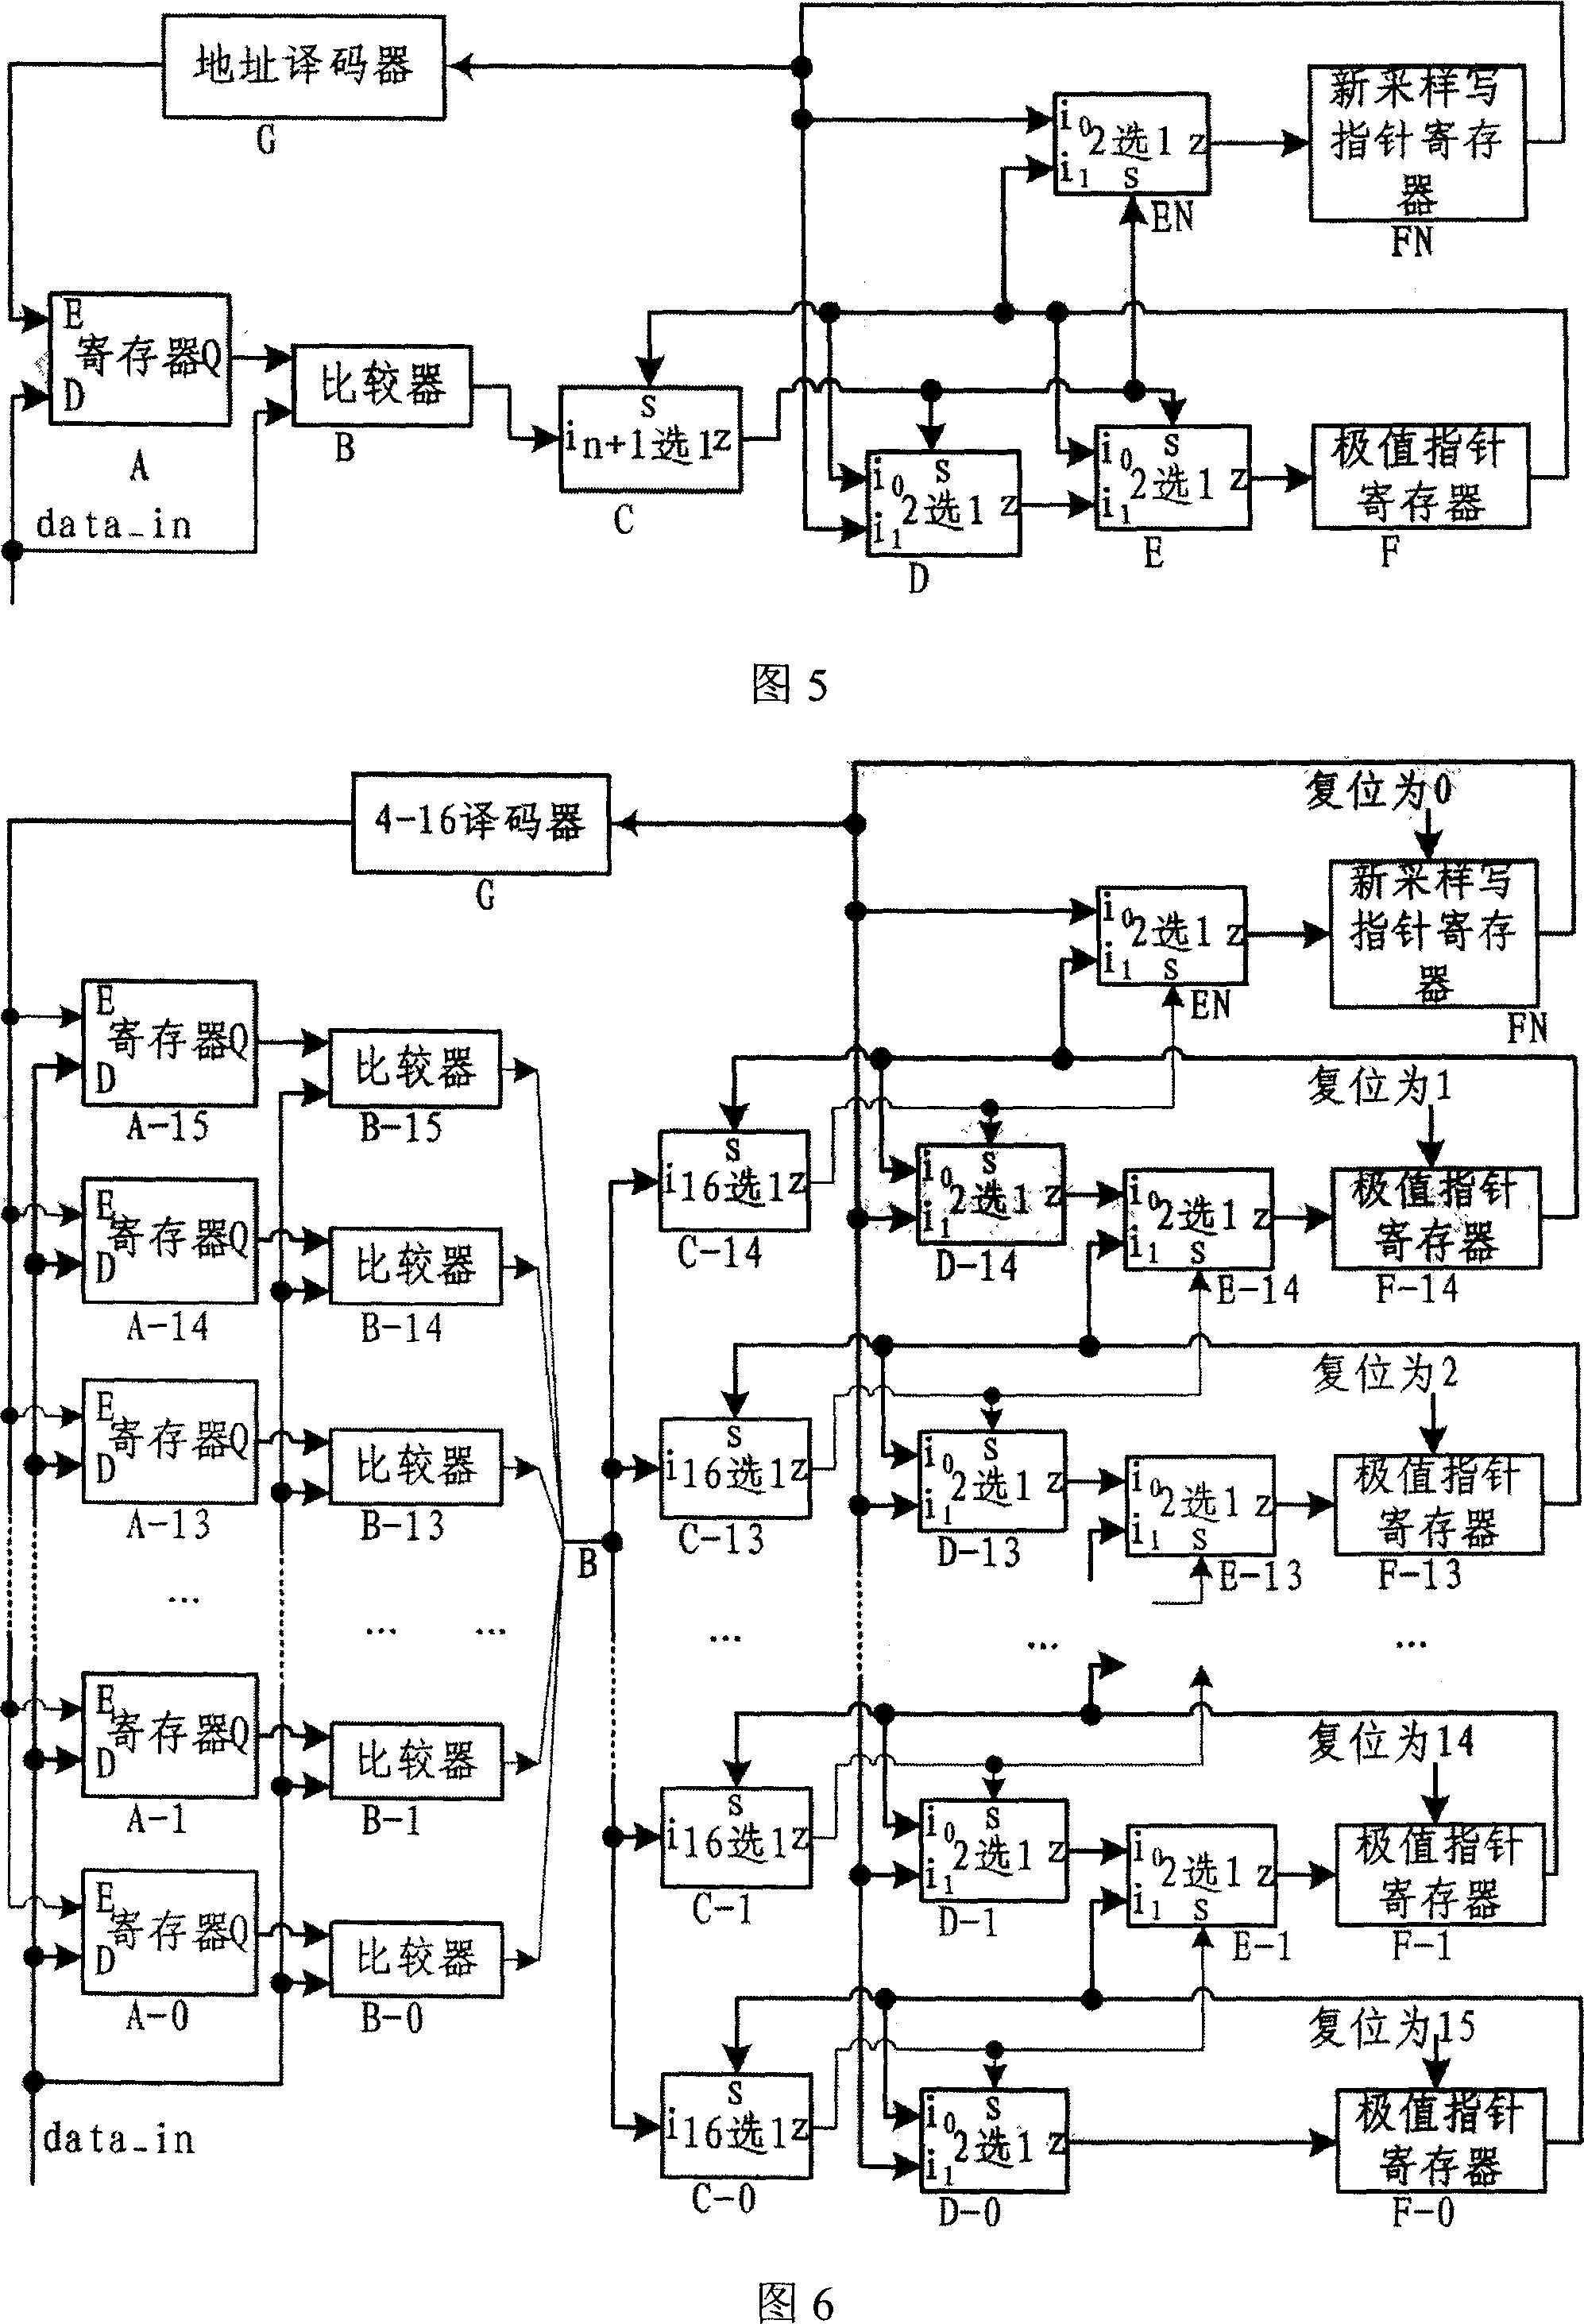 Hardware circuit for realizing data sequencing and method